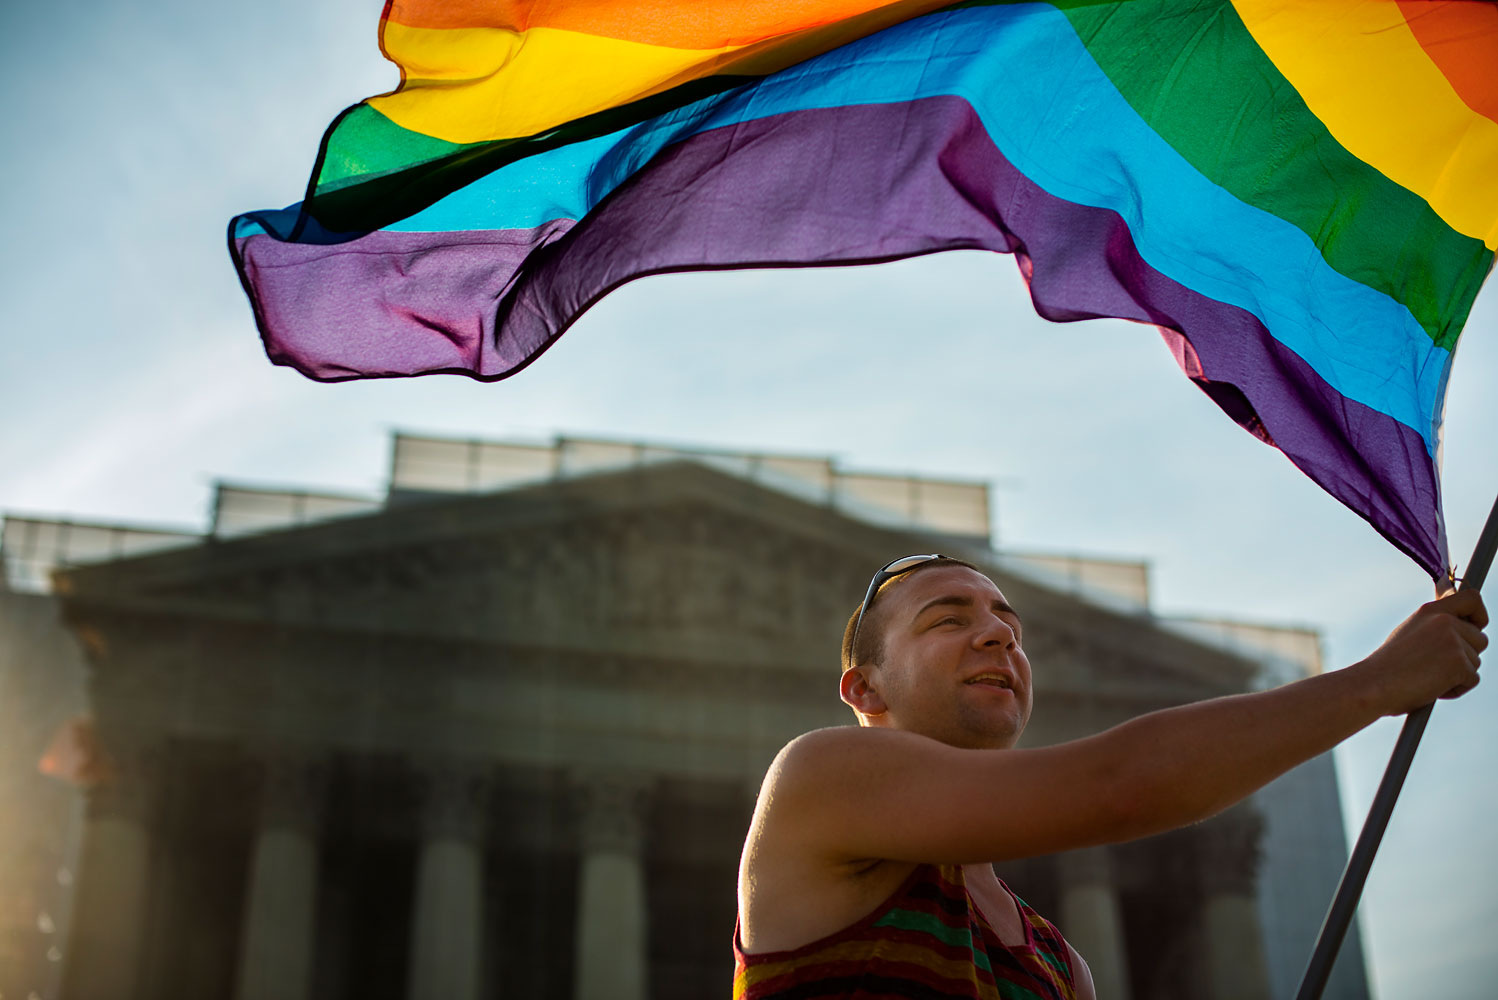 Same-sex-marriage supporters wave a rainbow flag in front of the U.S. Supreme Court in Washington, D.C., on June 26, 2013 (Marvin Joseph—The Washington Post/Getty Images)